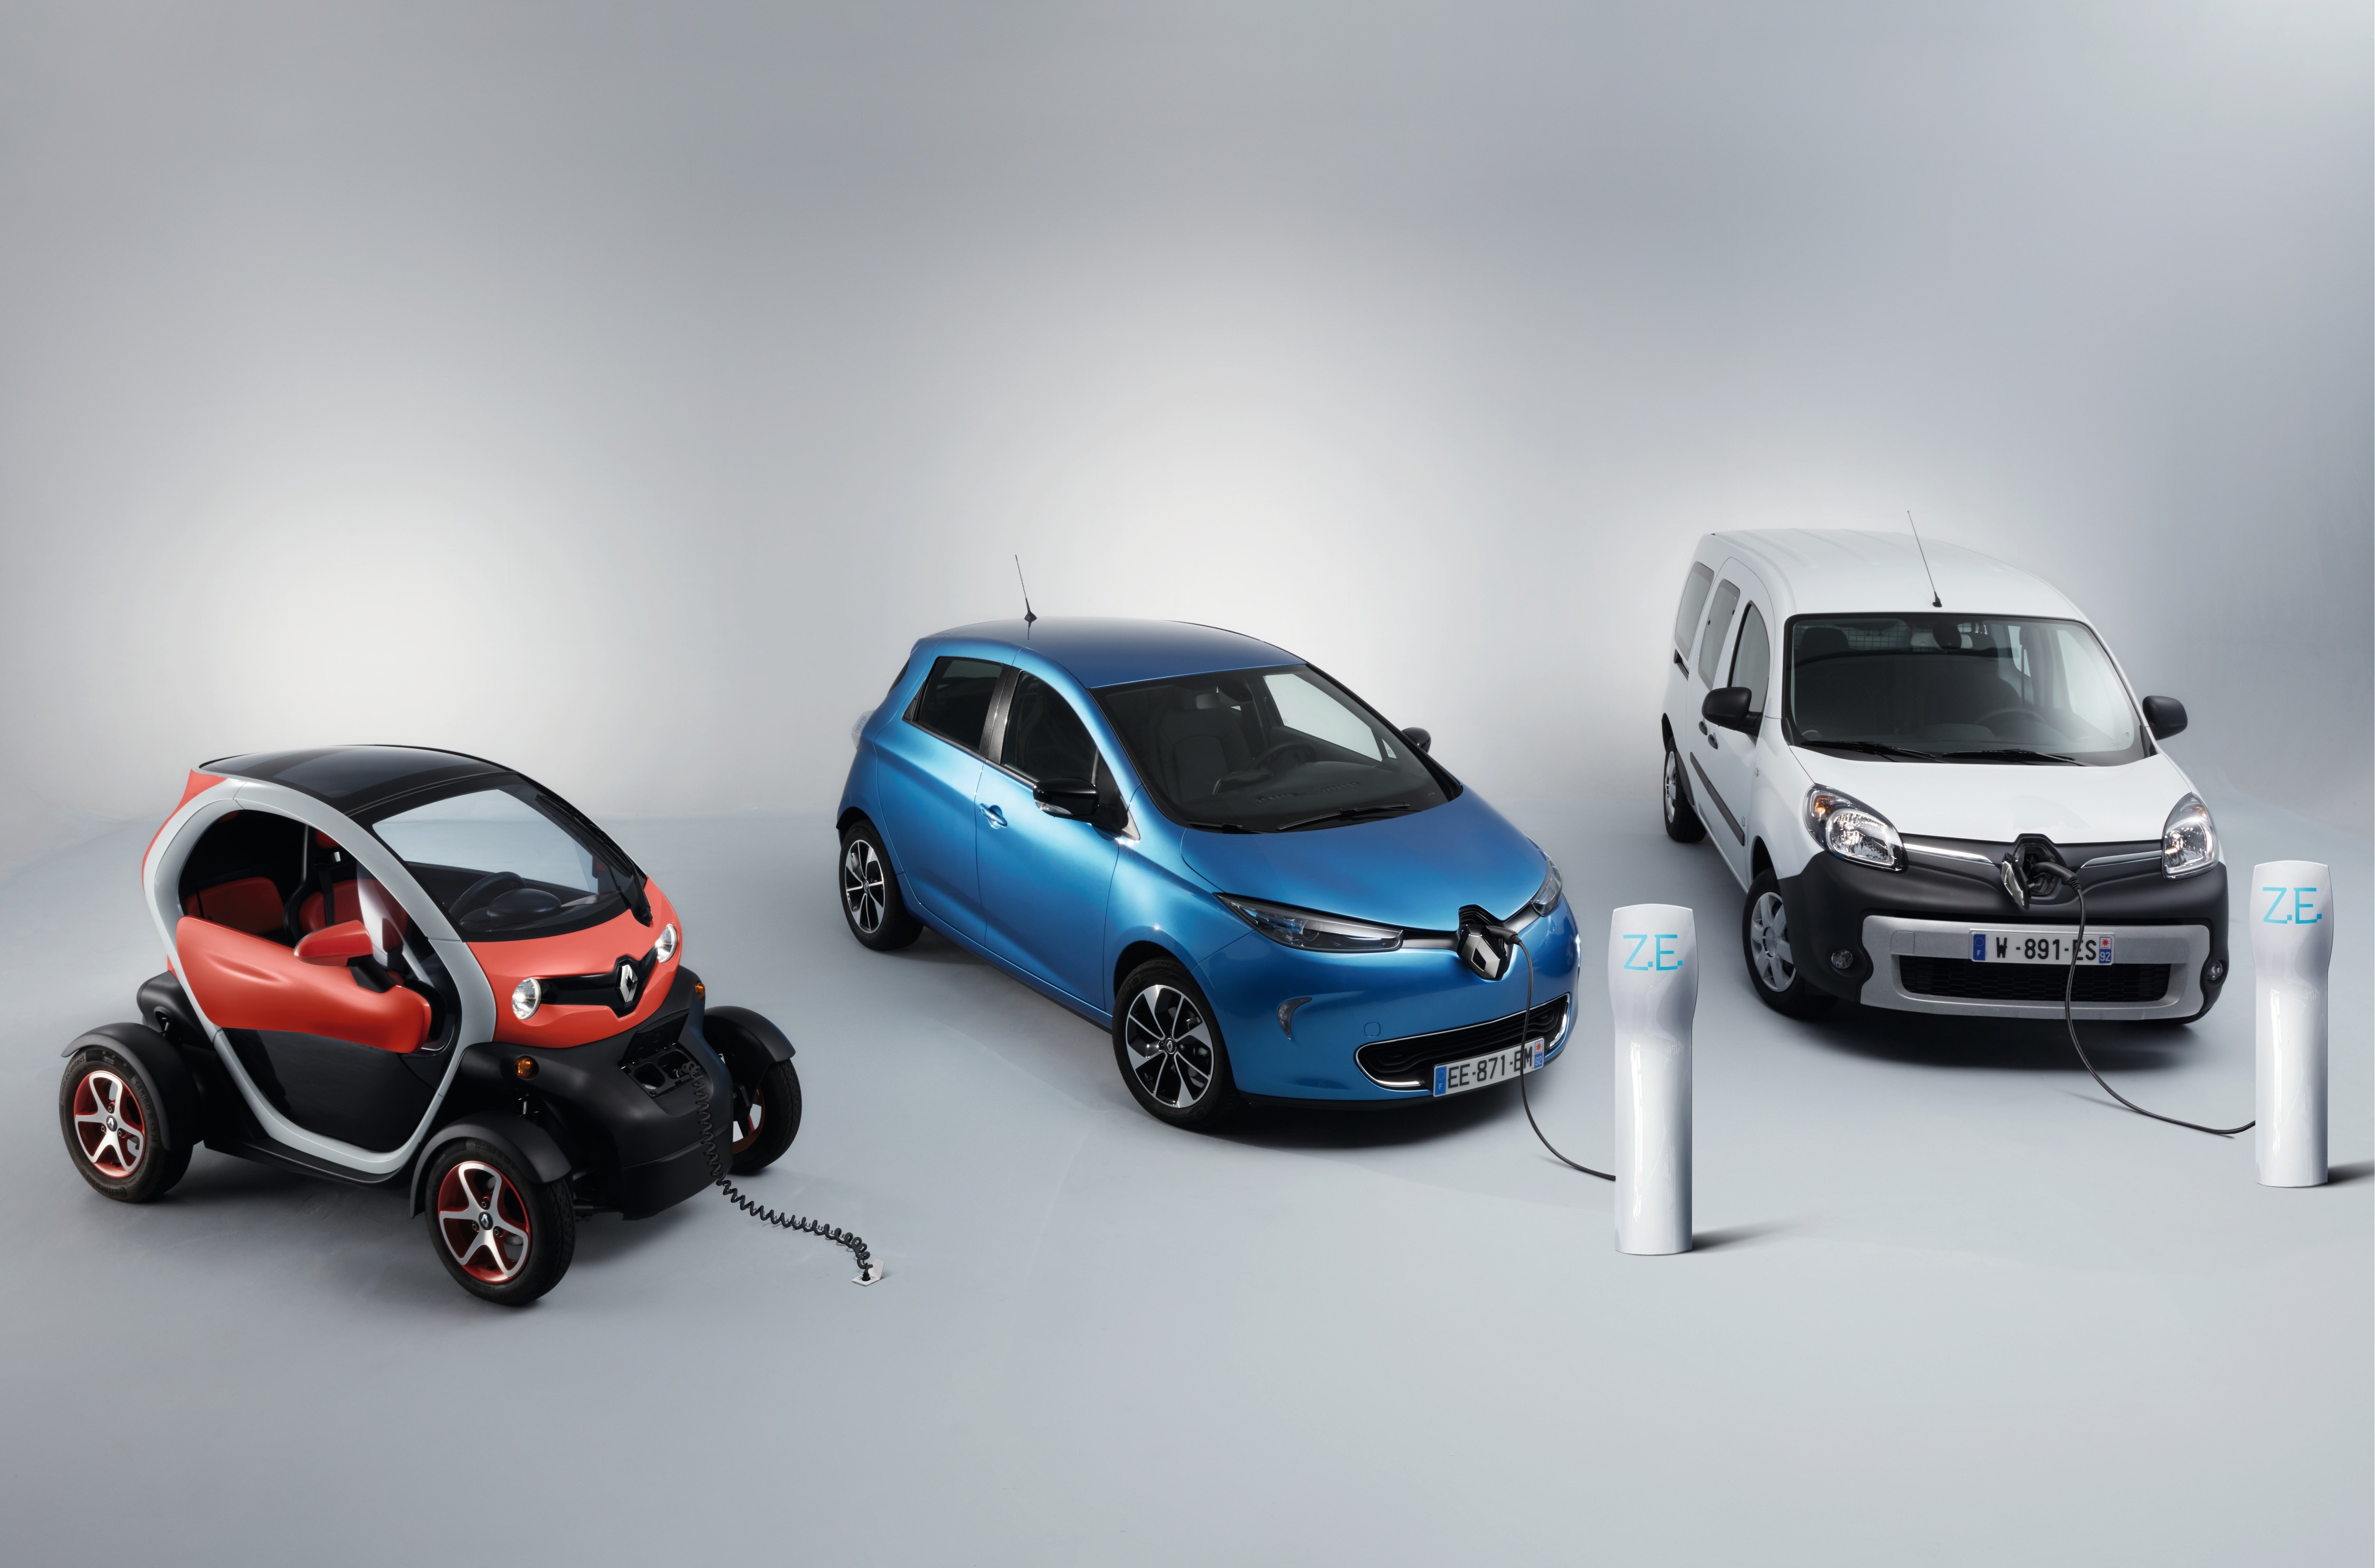 Renault's lineup of electric vehicles